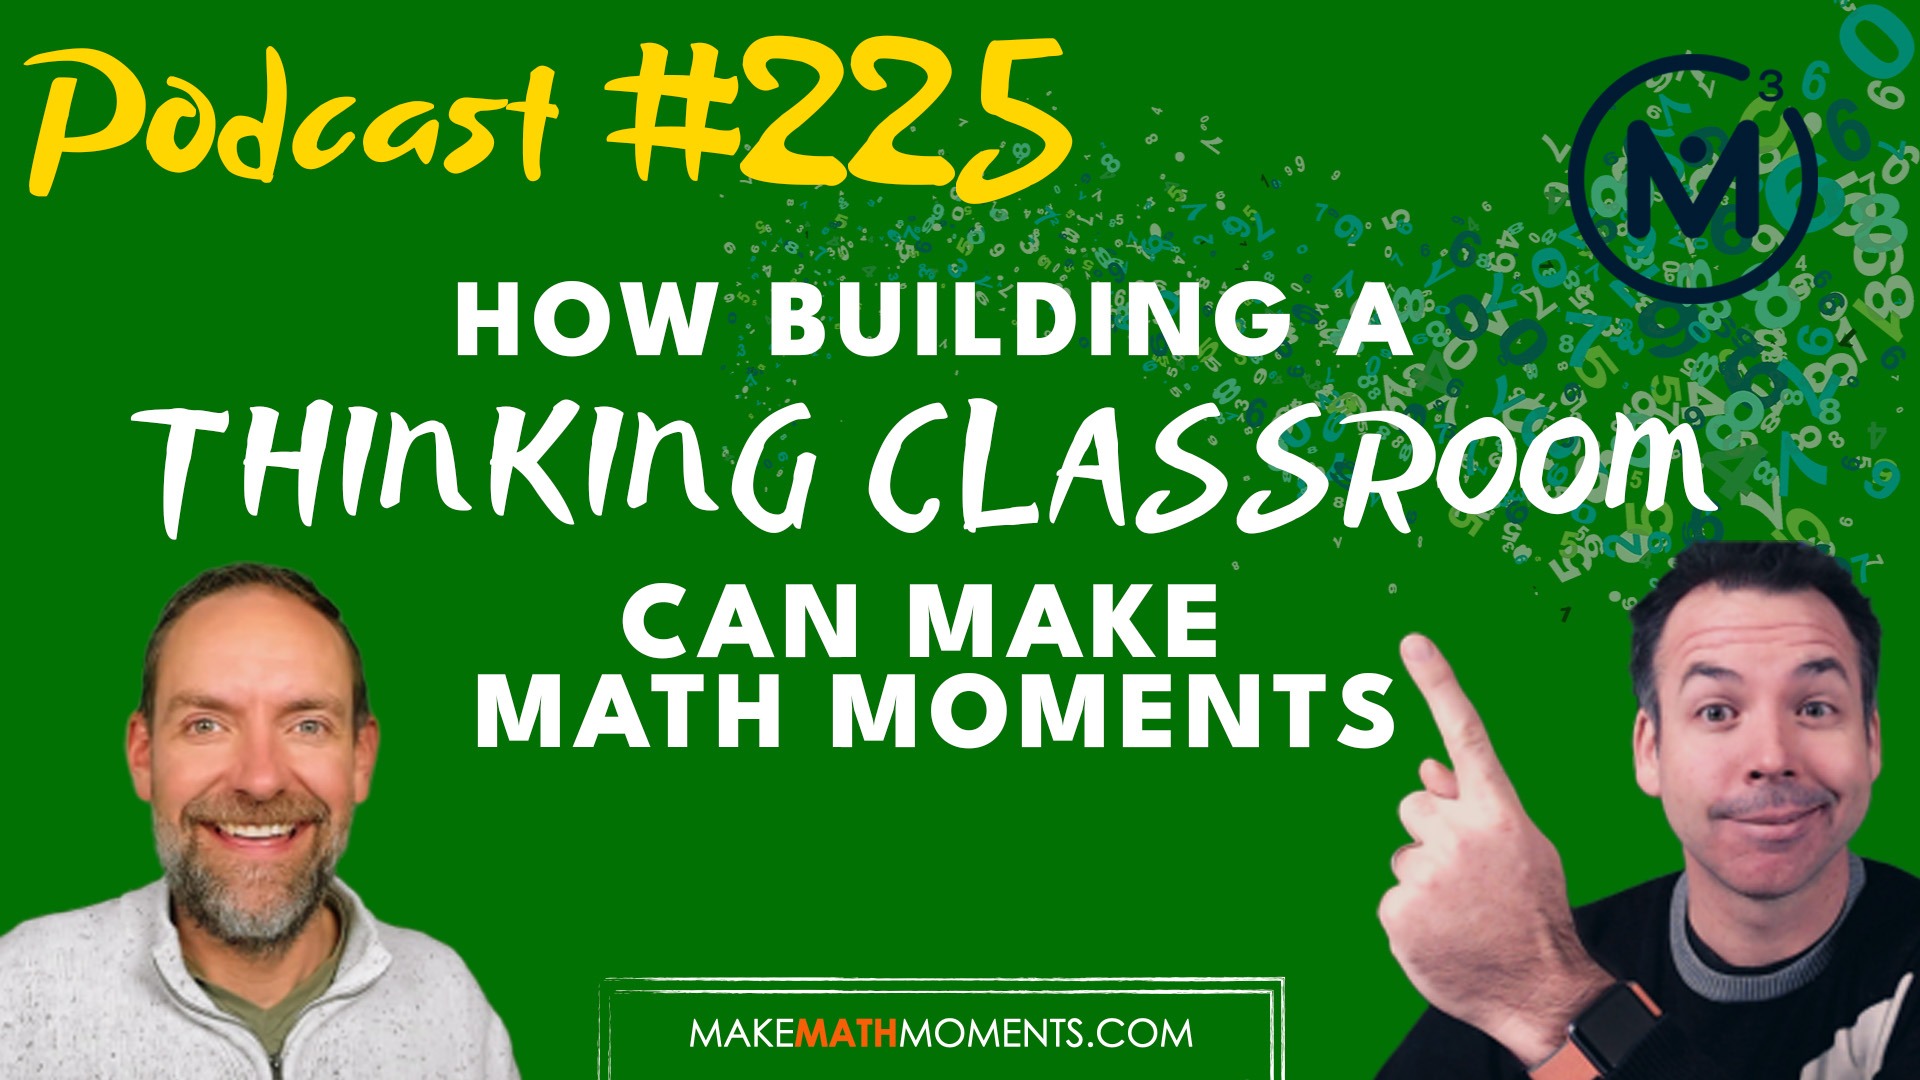 Episode #225: How Building a Thinking Classroom Can Make Math Moments